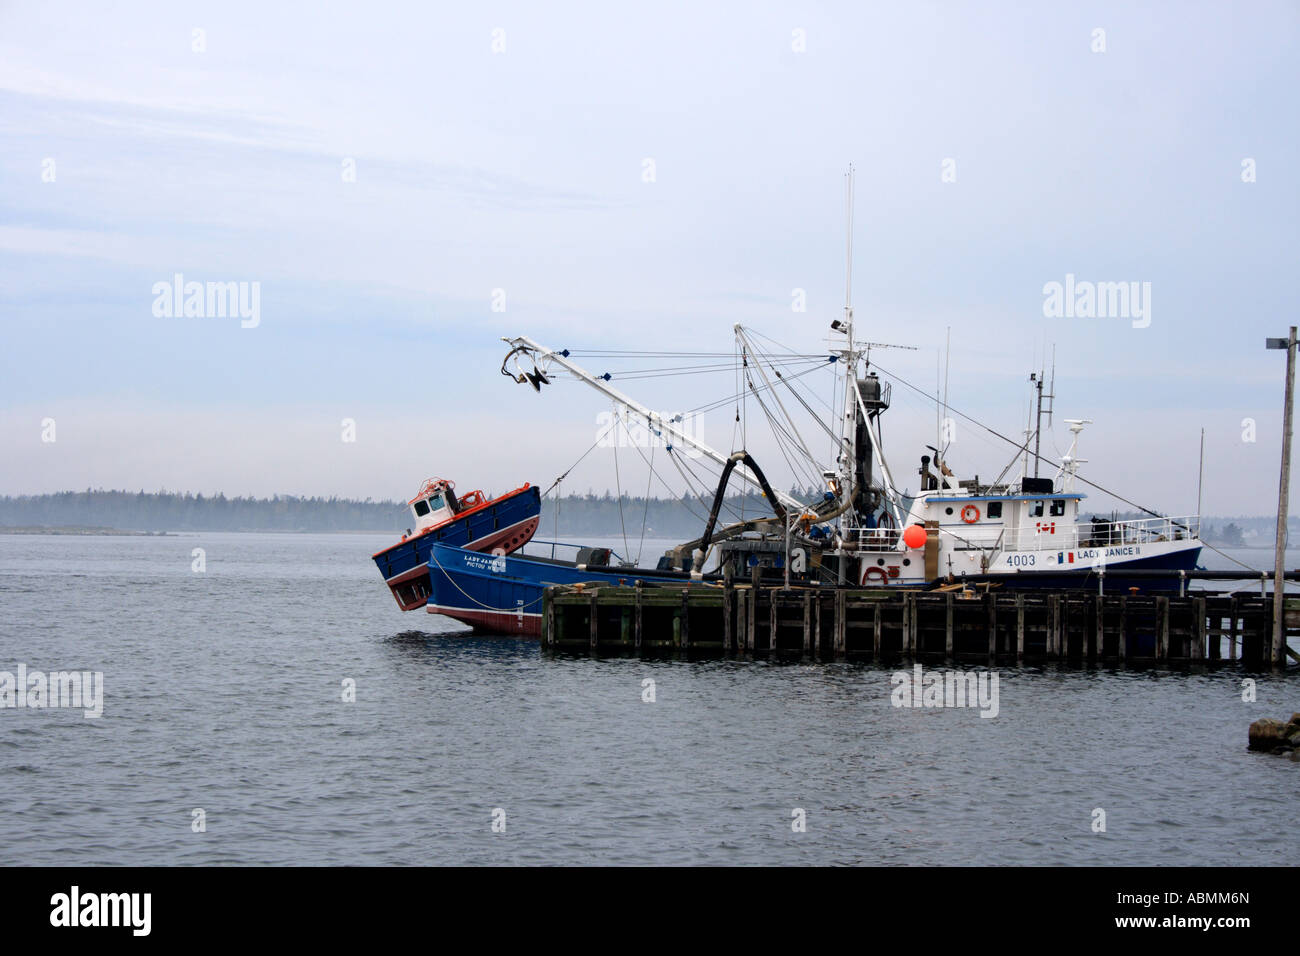 lobster fishing boat, fishing industry, Nova Scotia, Canada, North America. Photo by Willy Matheisl Stock Photo